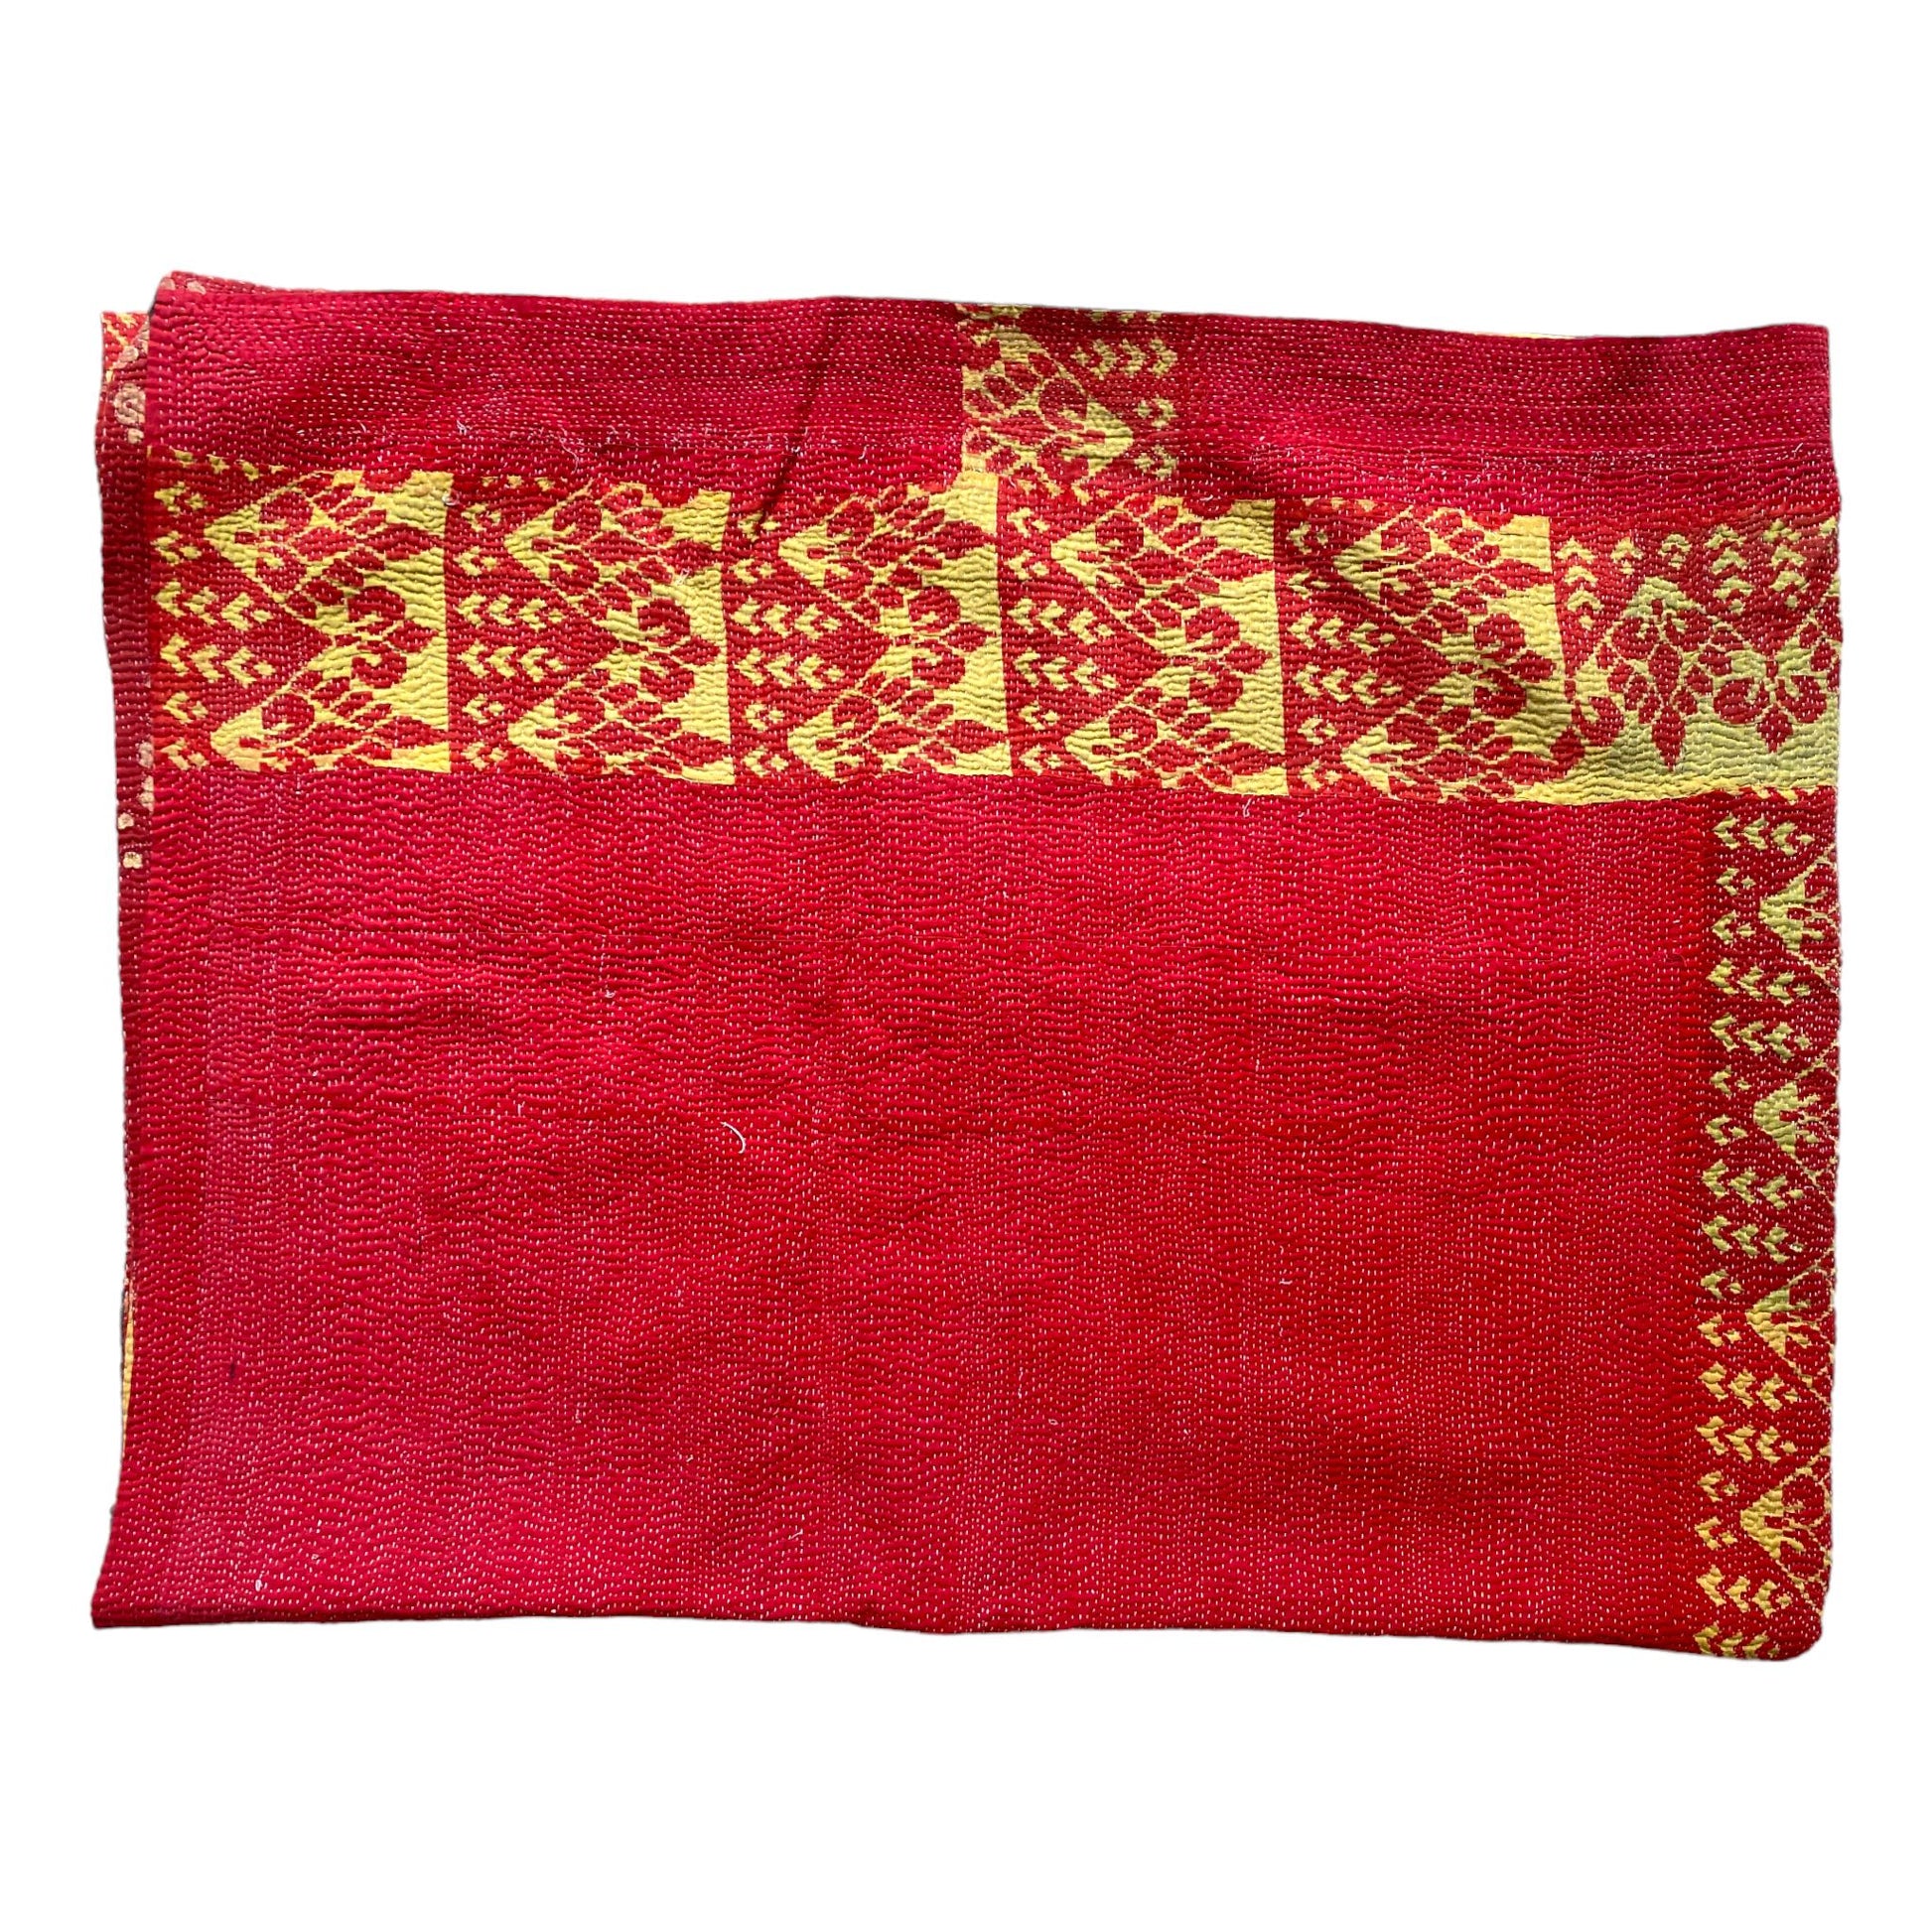 Red and yellow vintage kantha